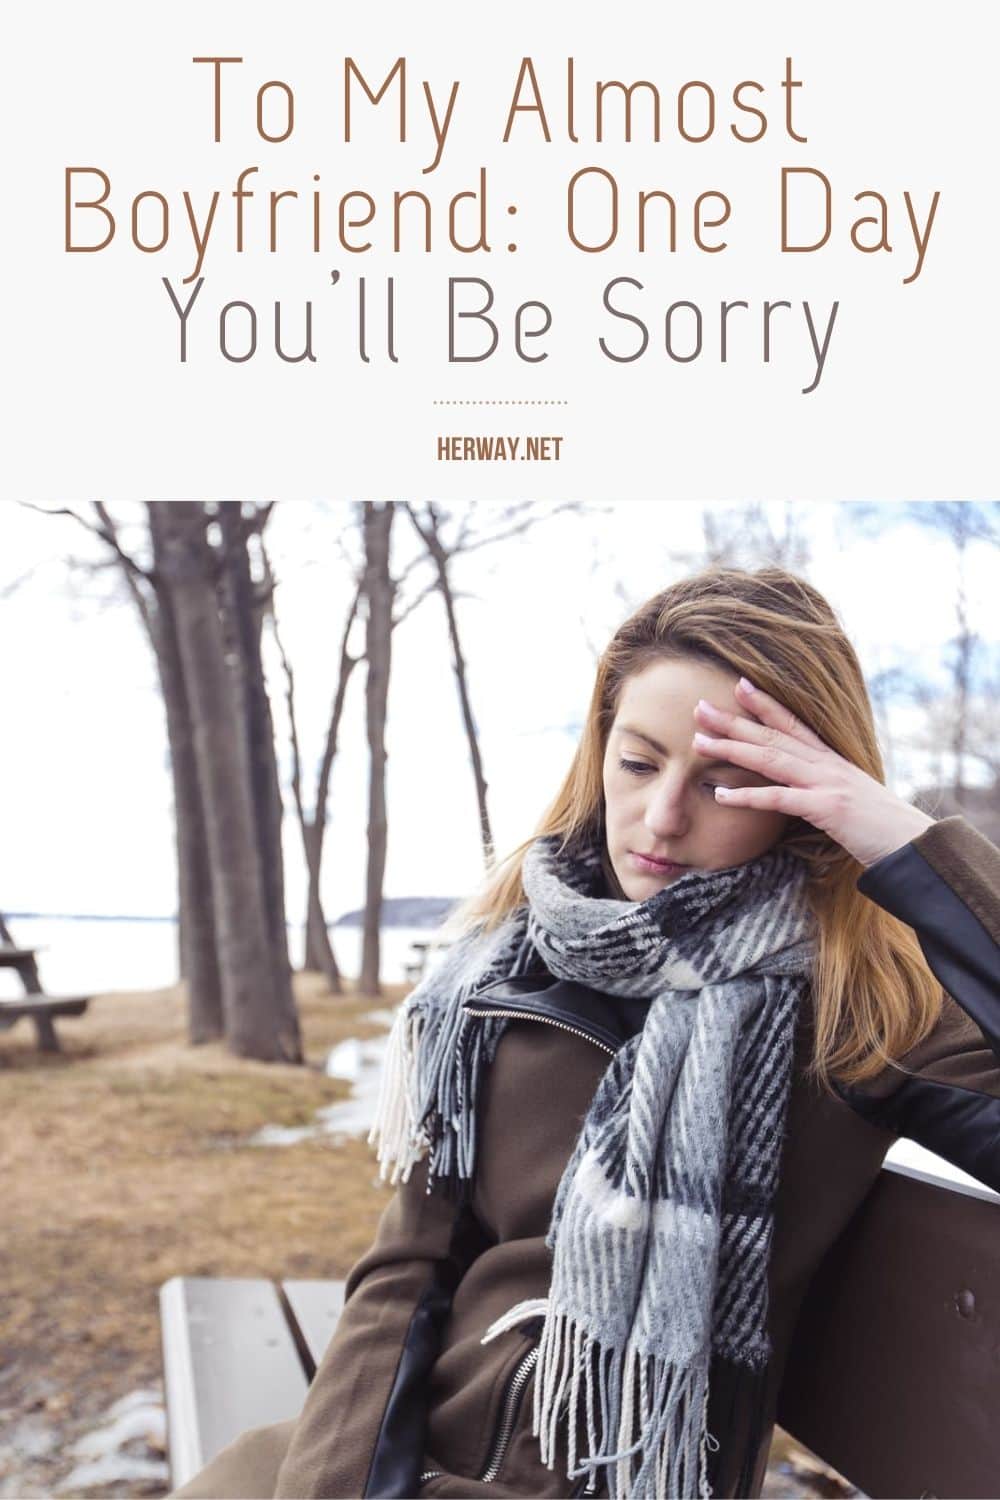 To My Almost Boyfriend: One Day You’ll Be Sorry